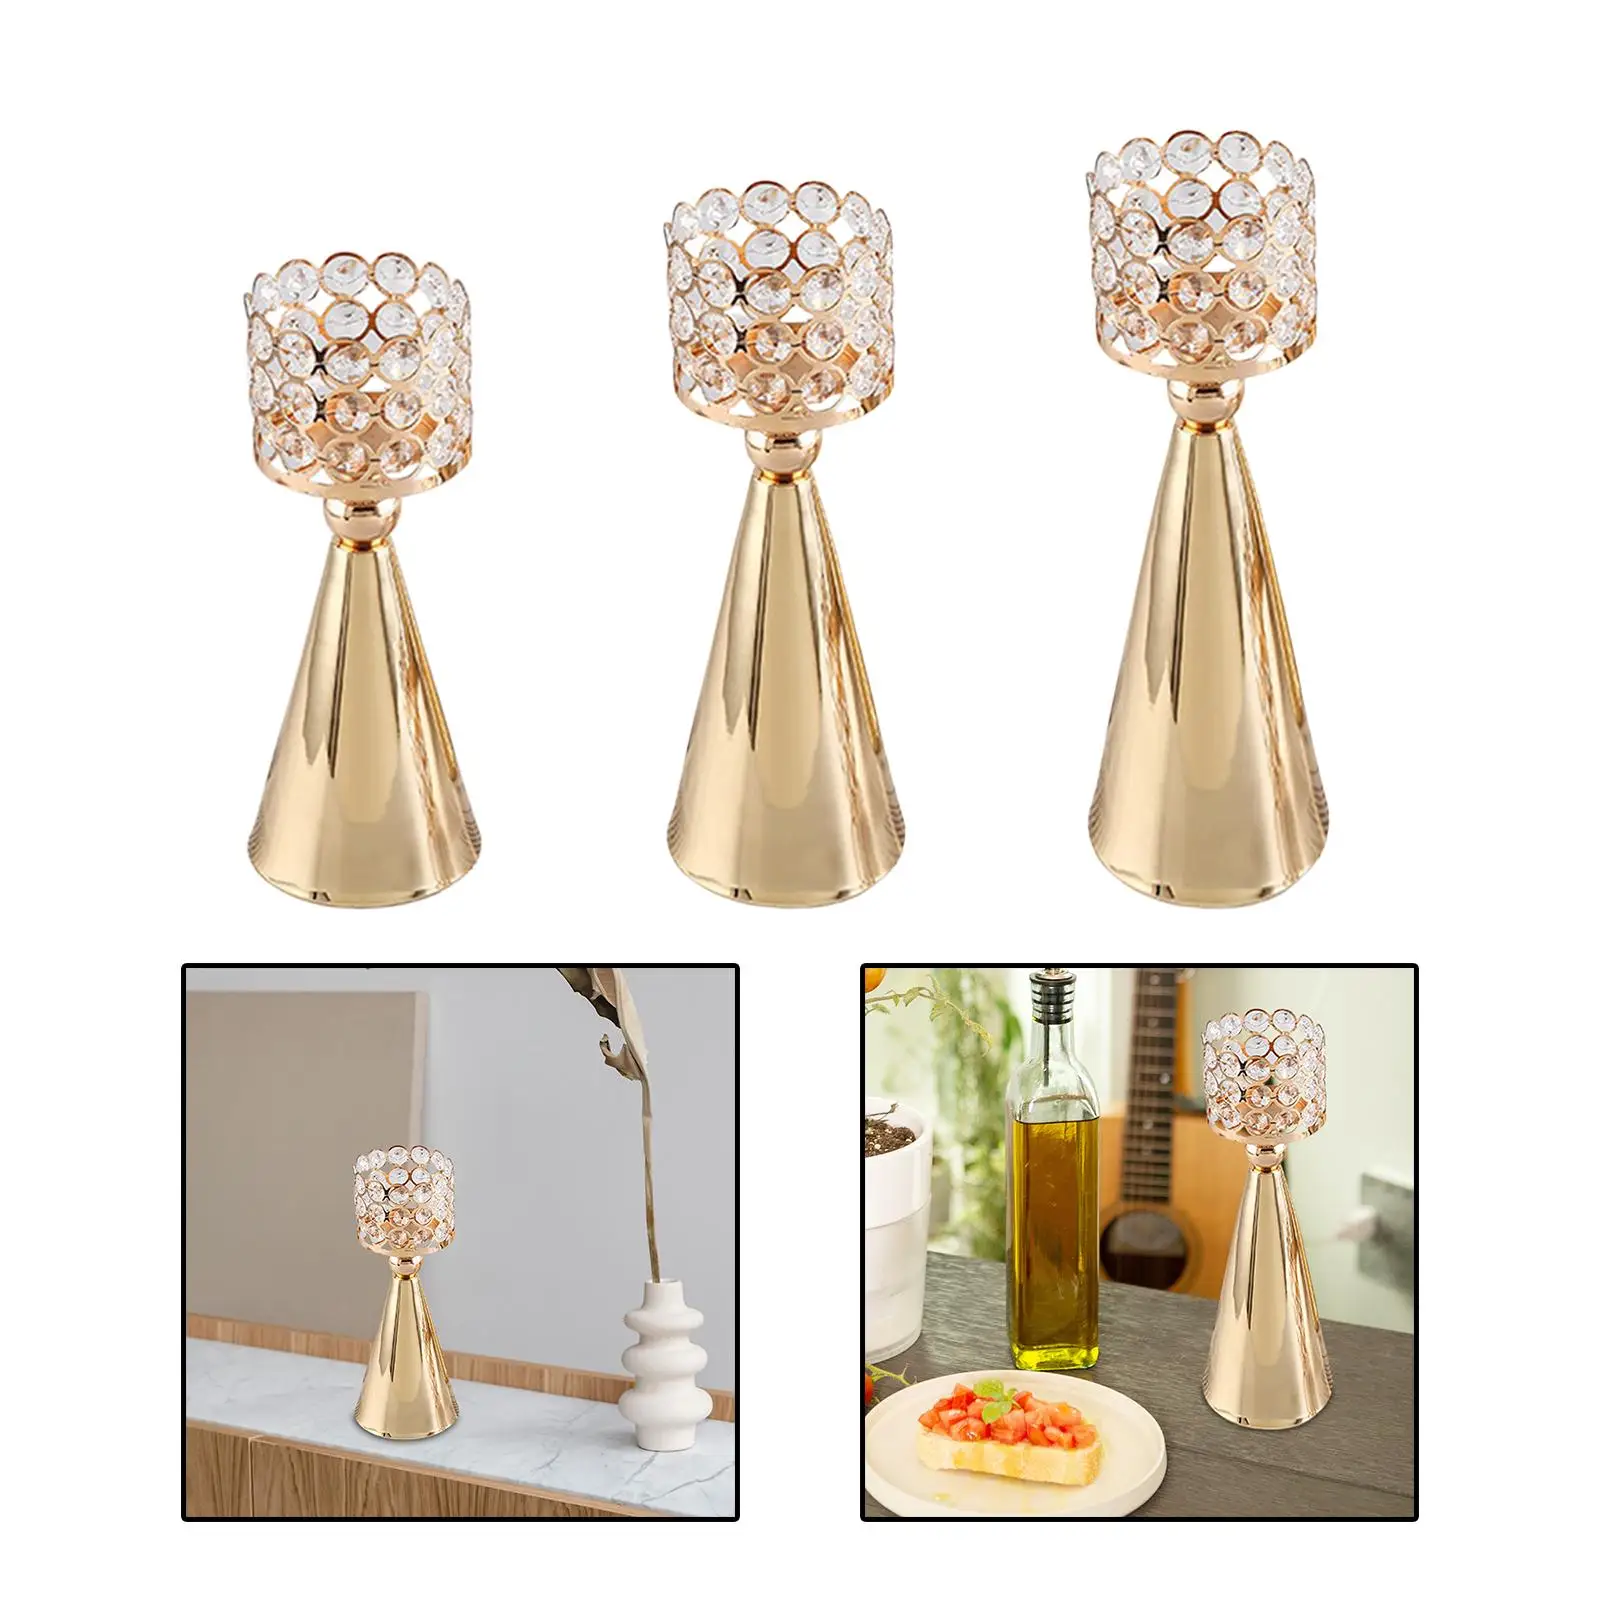 Candle Holder Luxury Centerpieces Decoractive Pillar Candlestick Holders for Living Room Party Home Decoration Halloween Tables